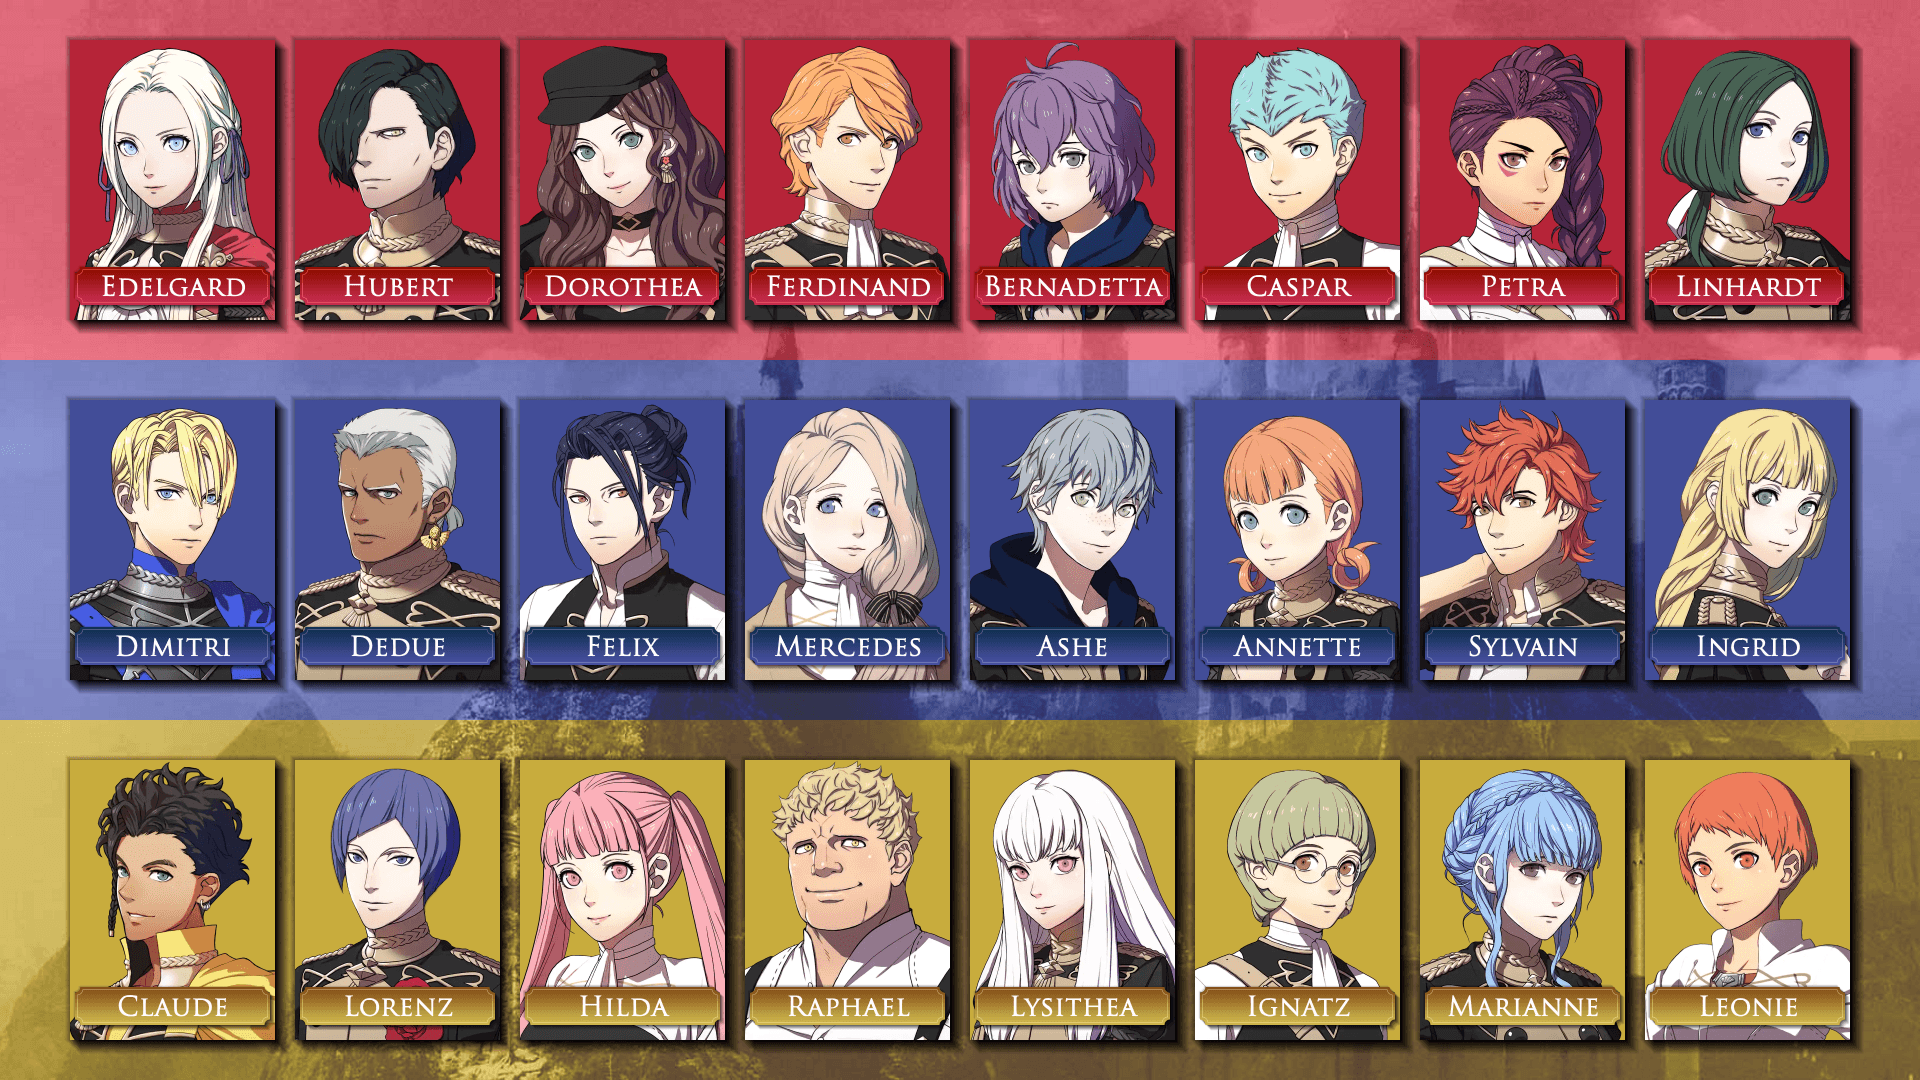 I made a desktop wallpaper featuring the students of Three Houses! (1920x1080) (nameless version in comments)